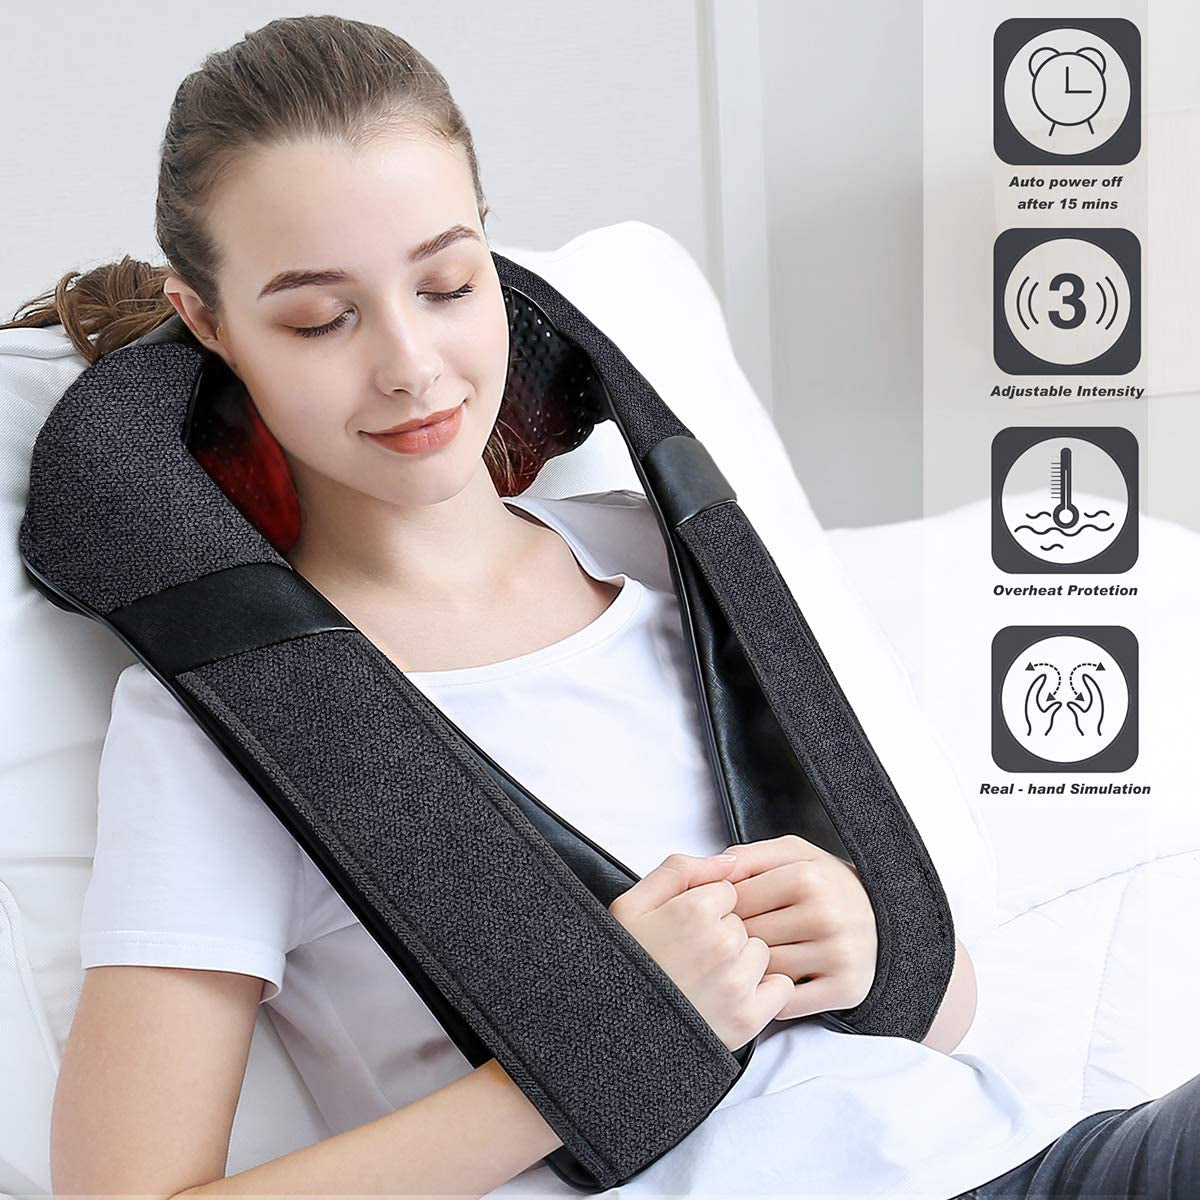 Back Massager, Shiatsu Neck Massager with Heat, Electric Shoulder Massager, Kneading Massage Pillow for Neck, Back, Shoulder, Foot, Leg, Muscle Pain Relief, Get Well Soon Presents - Christmas Gifts